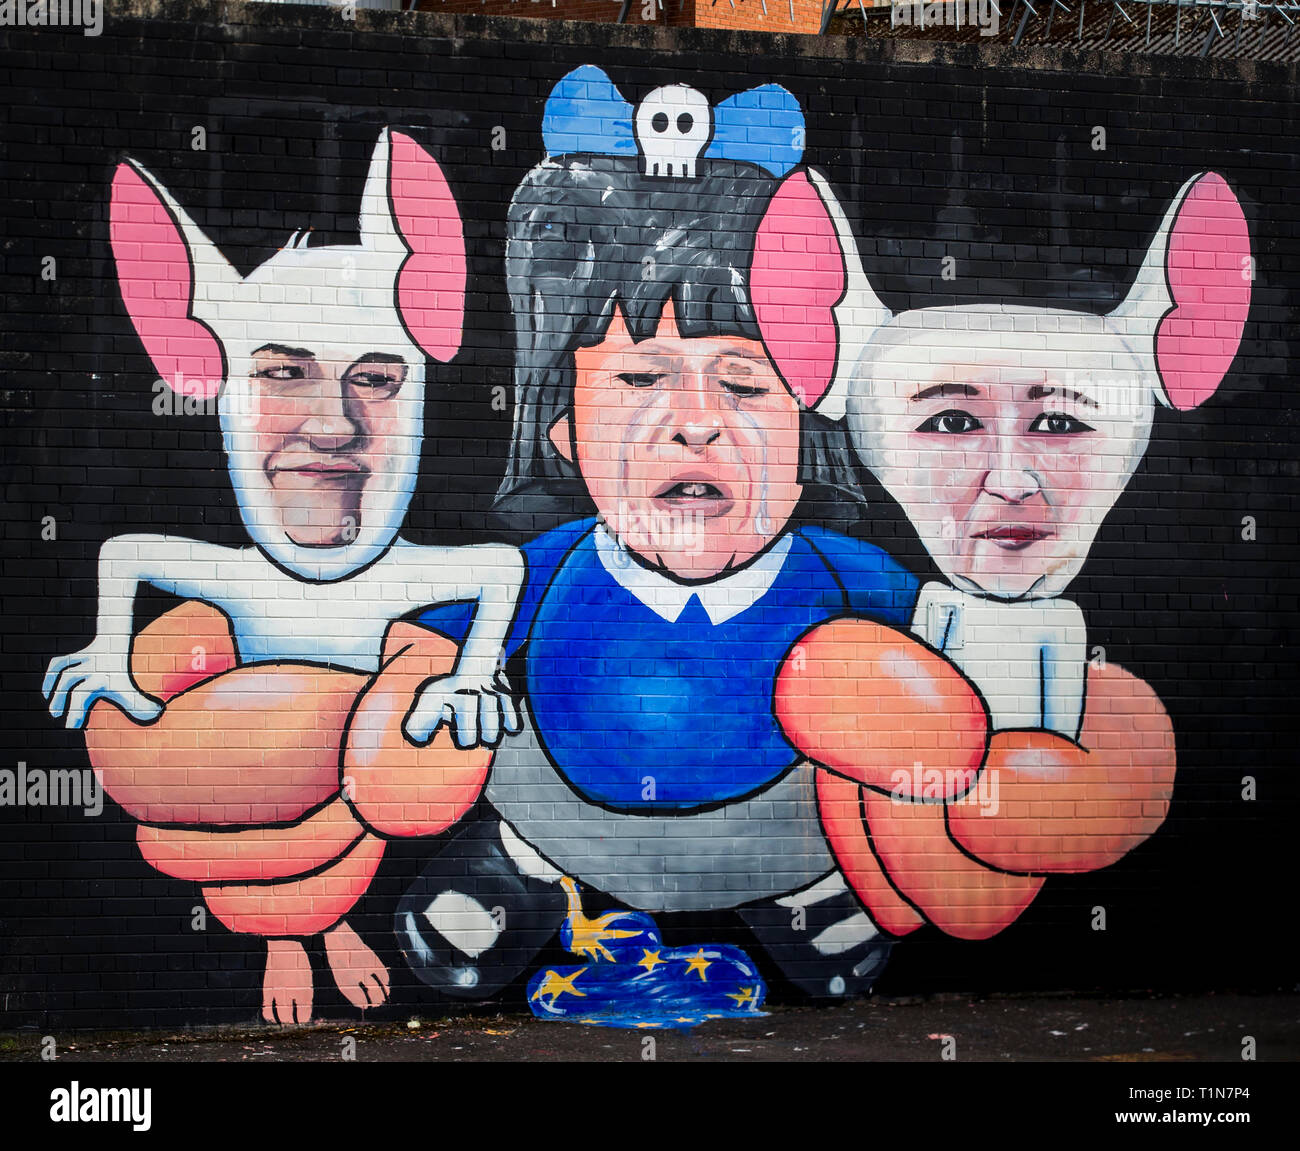 DUP leader Arlene Foster (left) and Sinn Fein deputy leader Michelle O'Neill (right) depicted as Pinky and the Brain, the genius mouse and his stupid sidekick who try to conquer the world each night, being held by Prime Minister Theresa May as Elmyra Duff, in a mural painted by artists Mark Ervine and Paul Doran on BelfastÕs peace line. Stock Photo